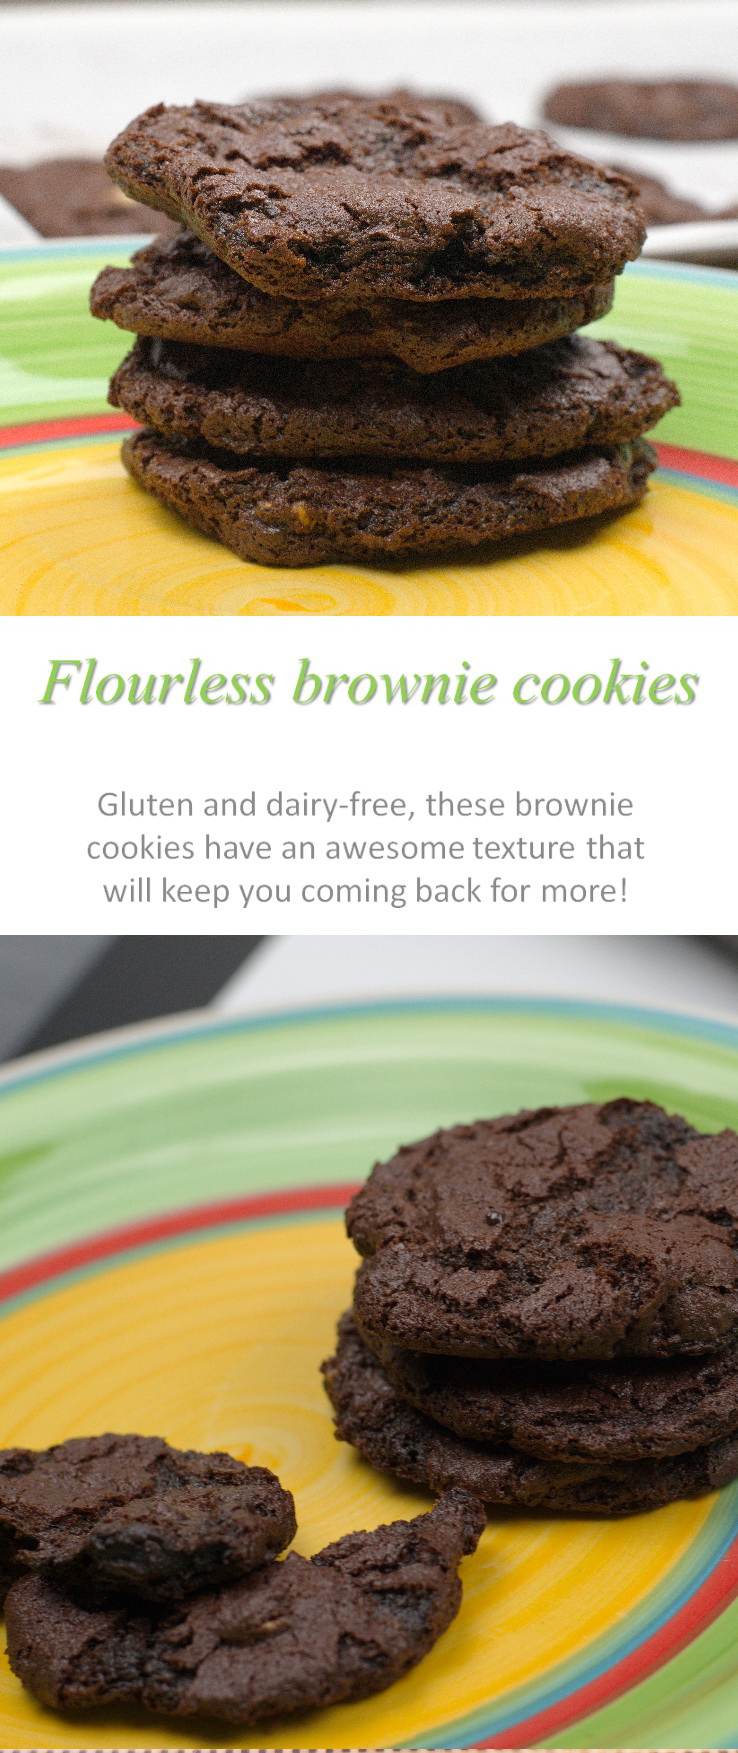 Rich and cake-like flourless brownie cookies that are gluten and dairy-free with an awesome texture. #brownies